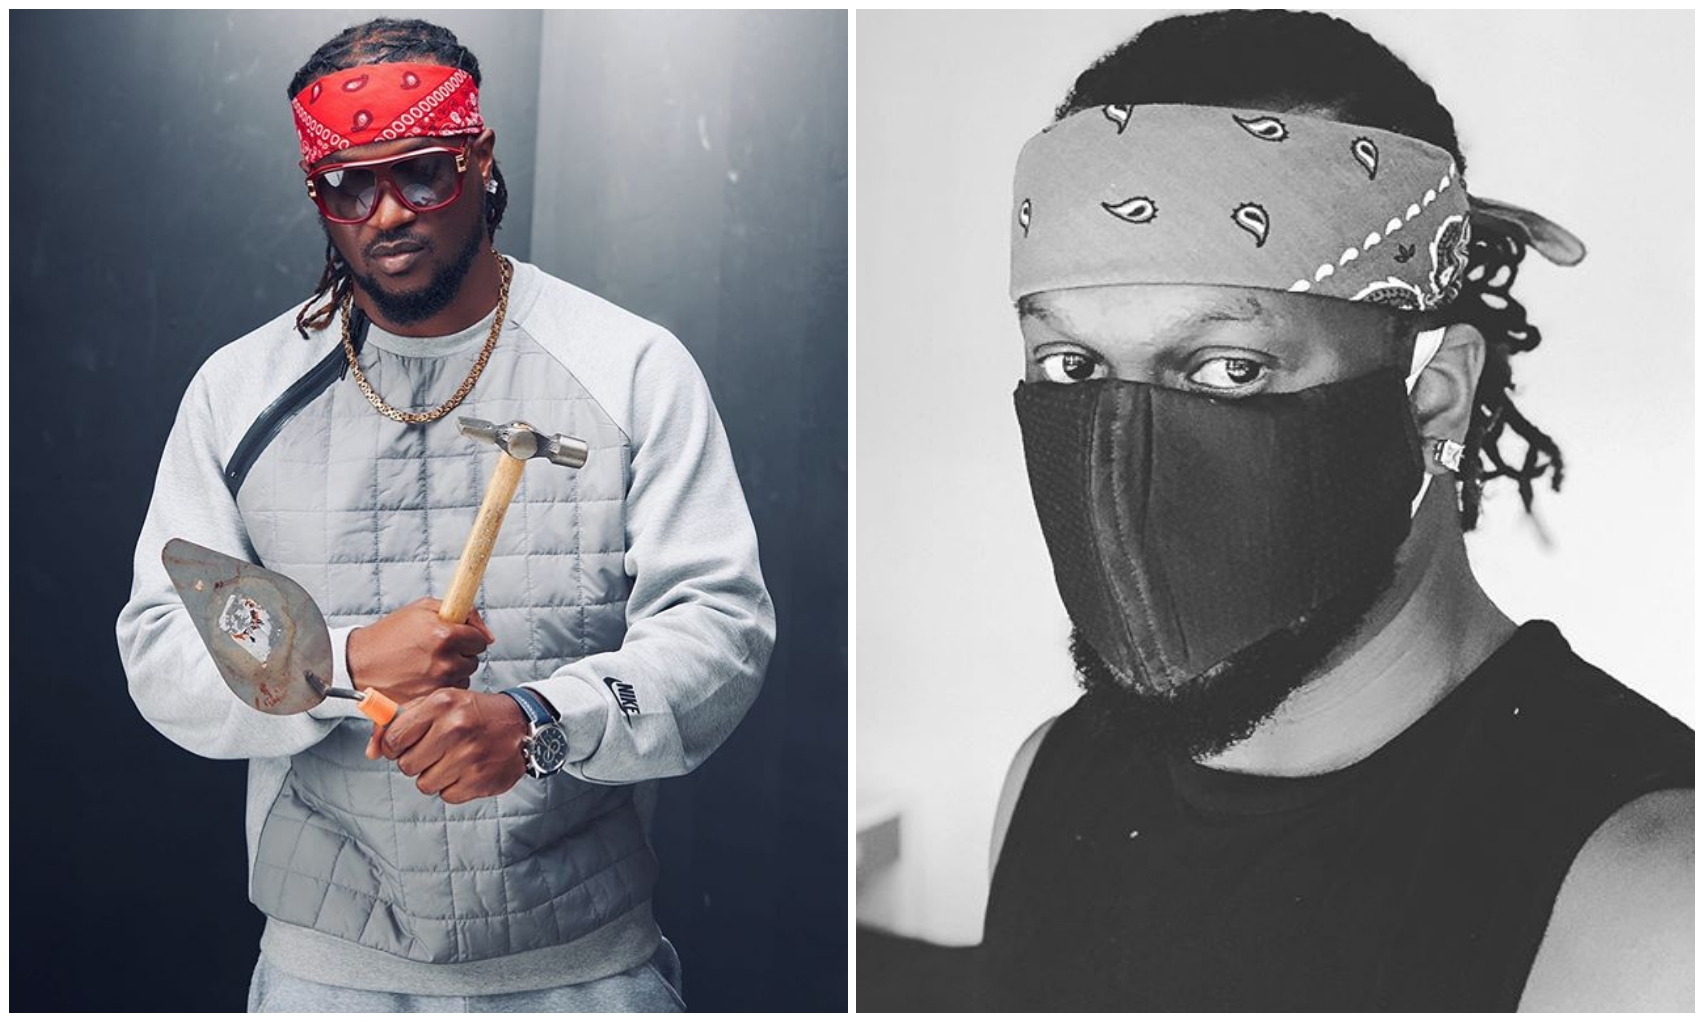 'Una forefathers do 419 codedly una cun dey shout' – Rude Boy slams fraudsters who flaunt on social media